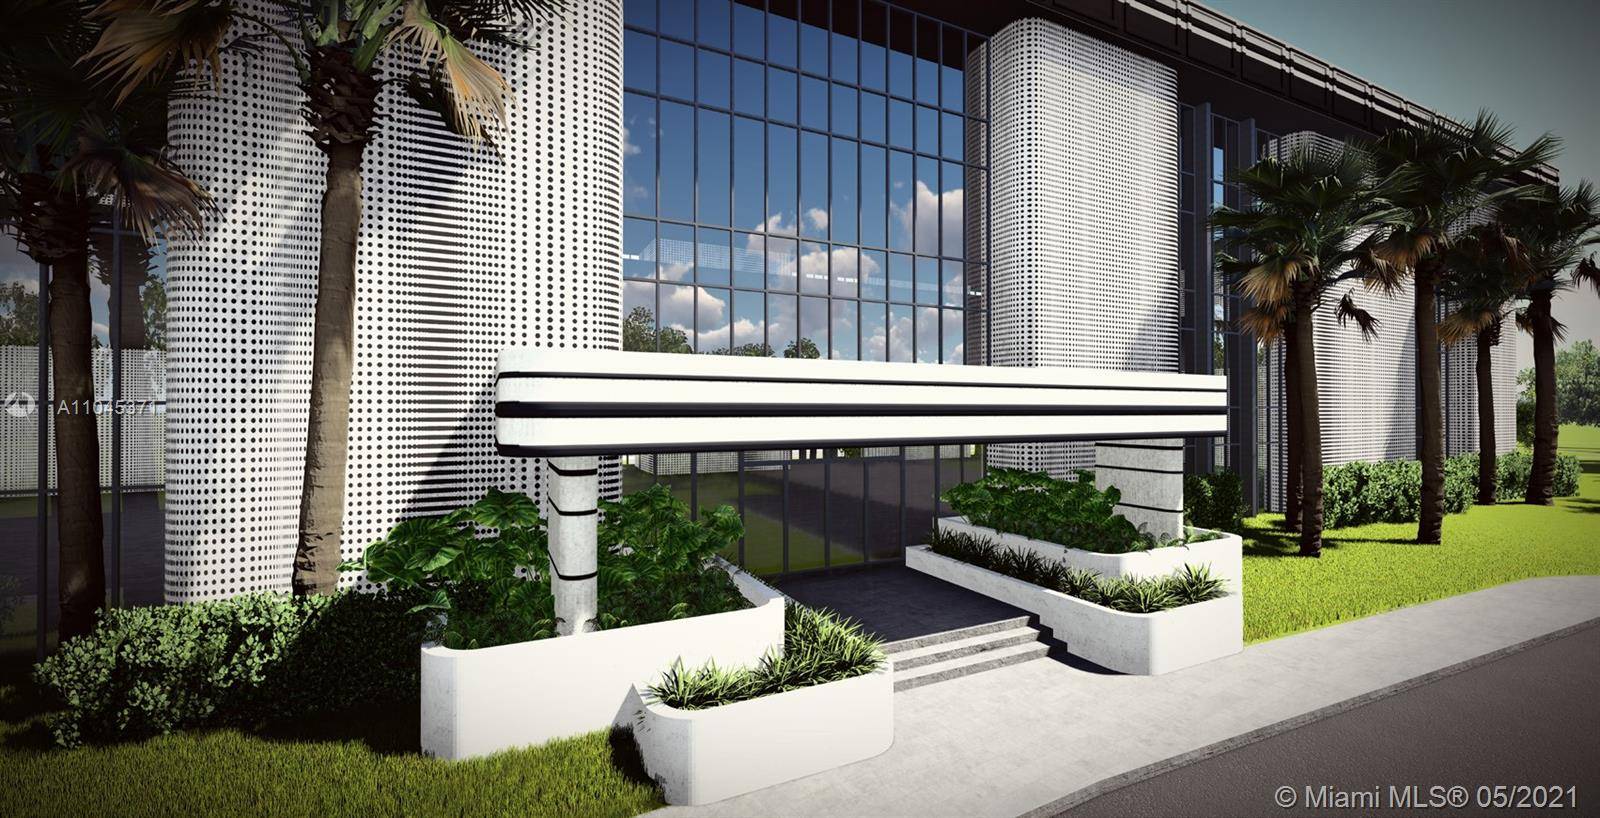 QUATTRO Miami is undergoing an unprecedented aesthetic modernization, featuring innovative community friendly solutions, redesigned central courtyard and upgraded amenities by incorporating an artfully balanced organic design, which promises to enhance ..